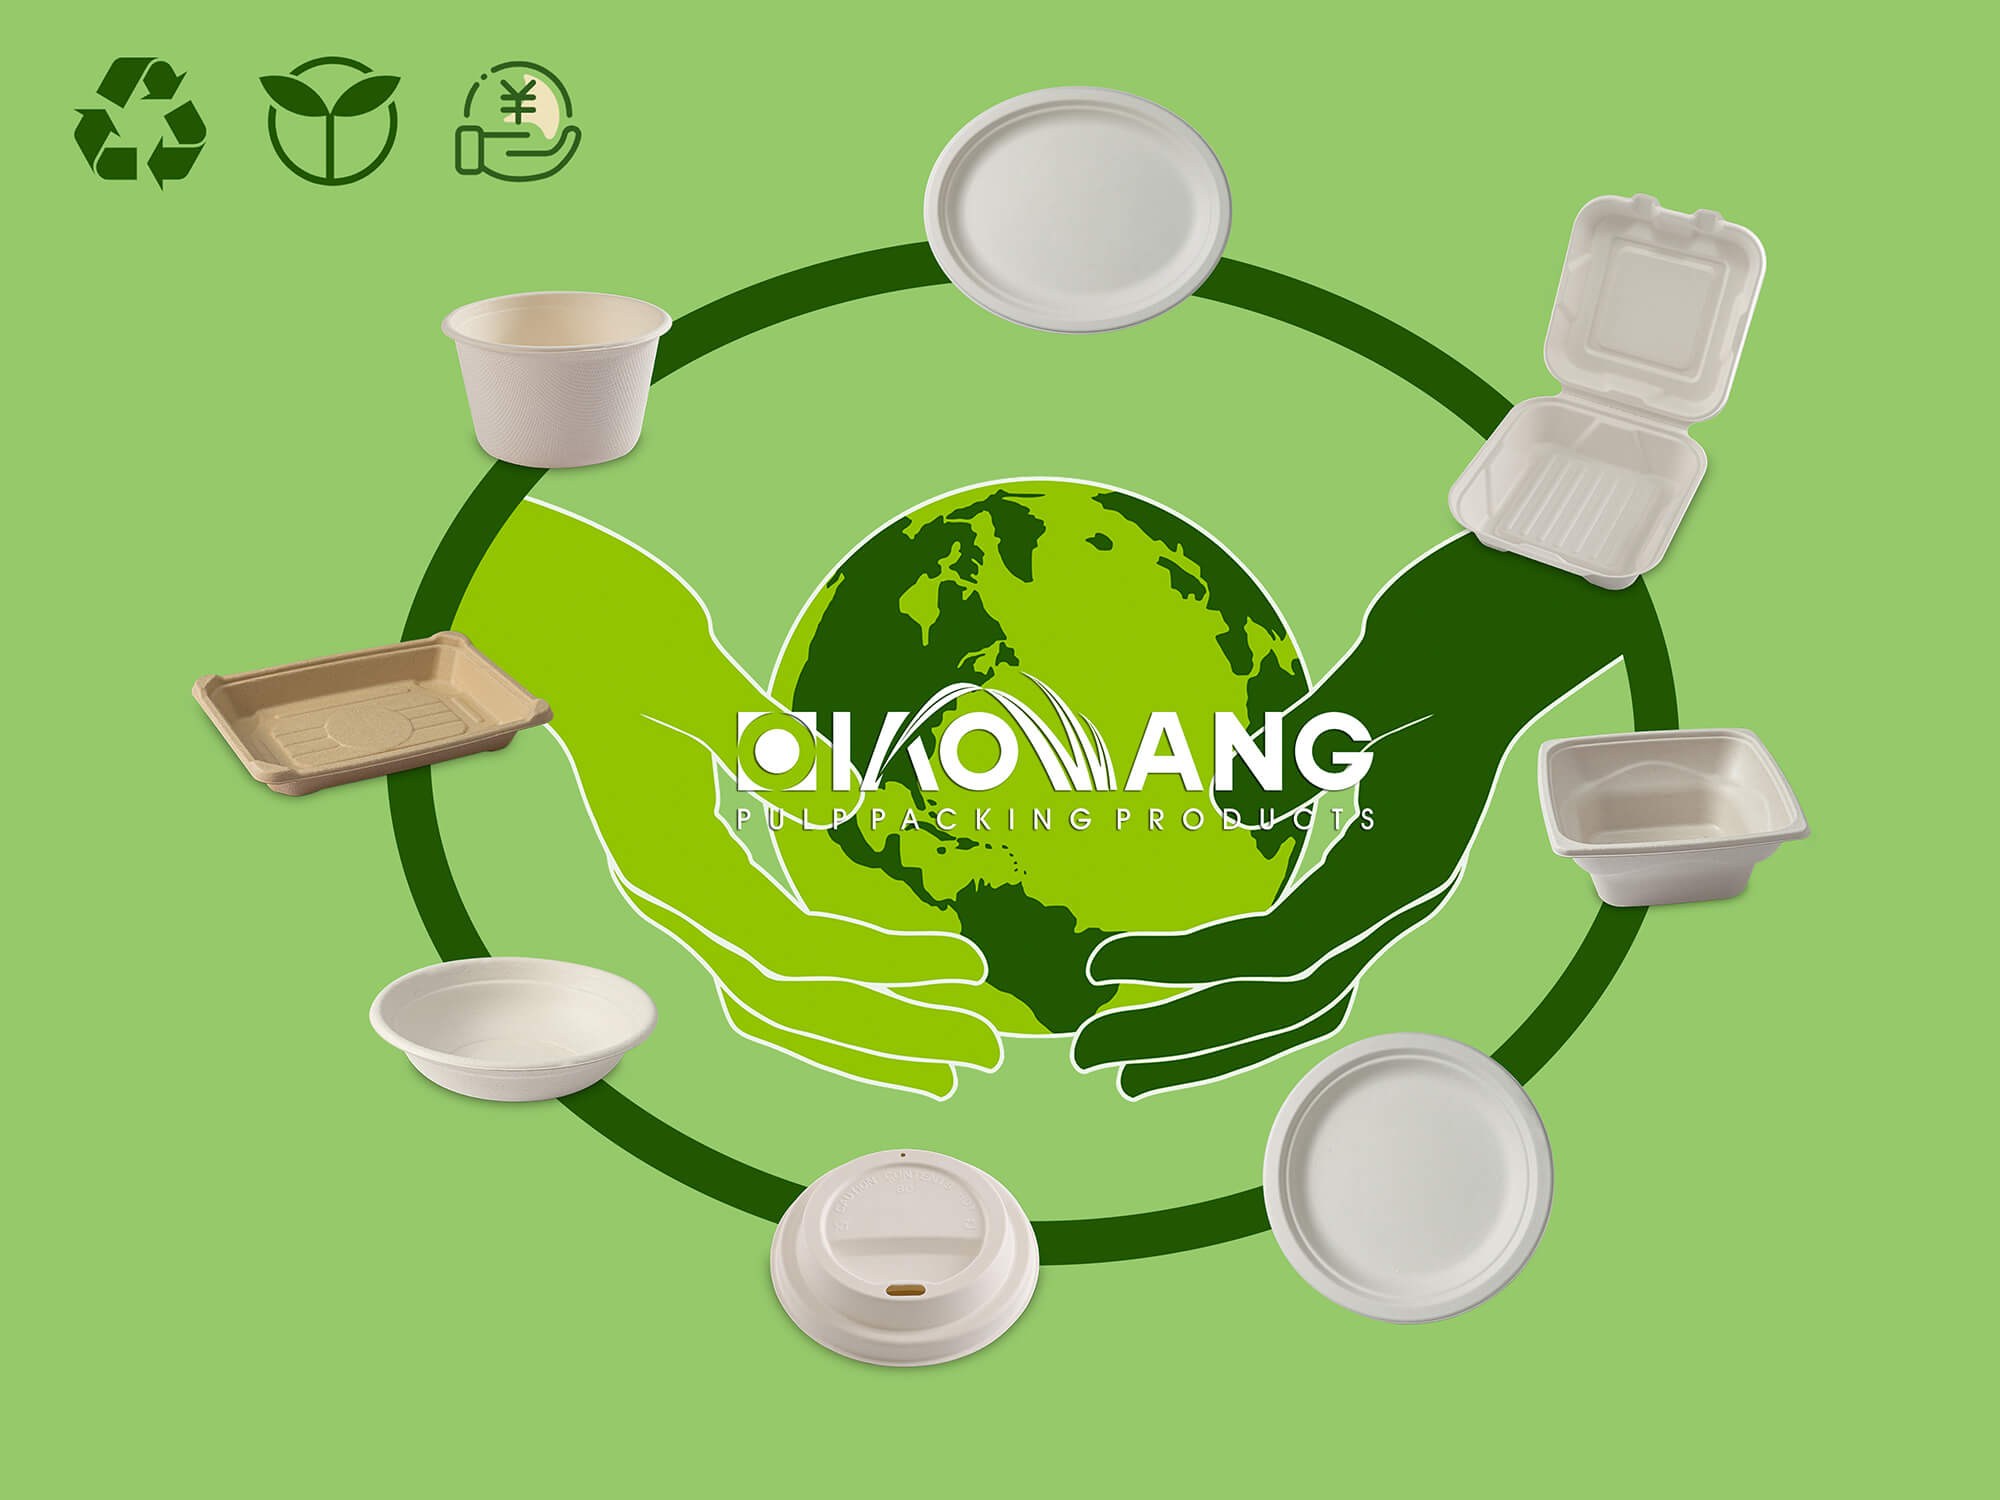 Why Bagasse Tableware Is Popular  Food and beverage industry, Food  quality, Sustainable food